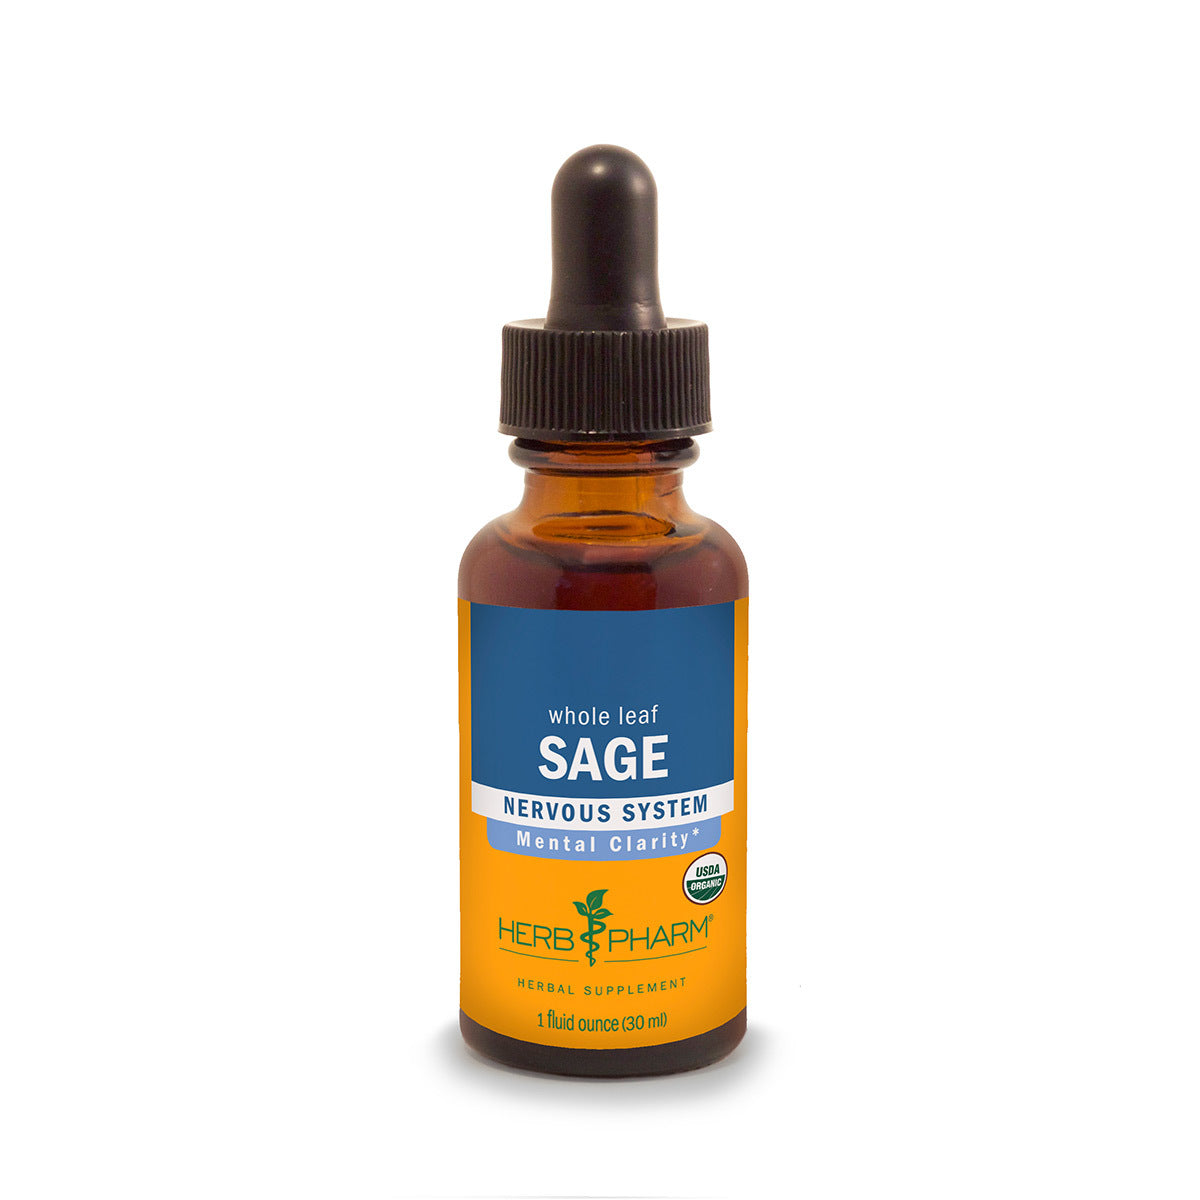 Primary image of Sage Extract